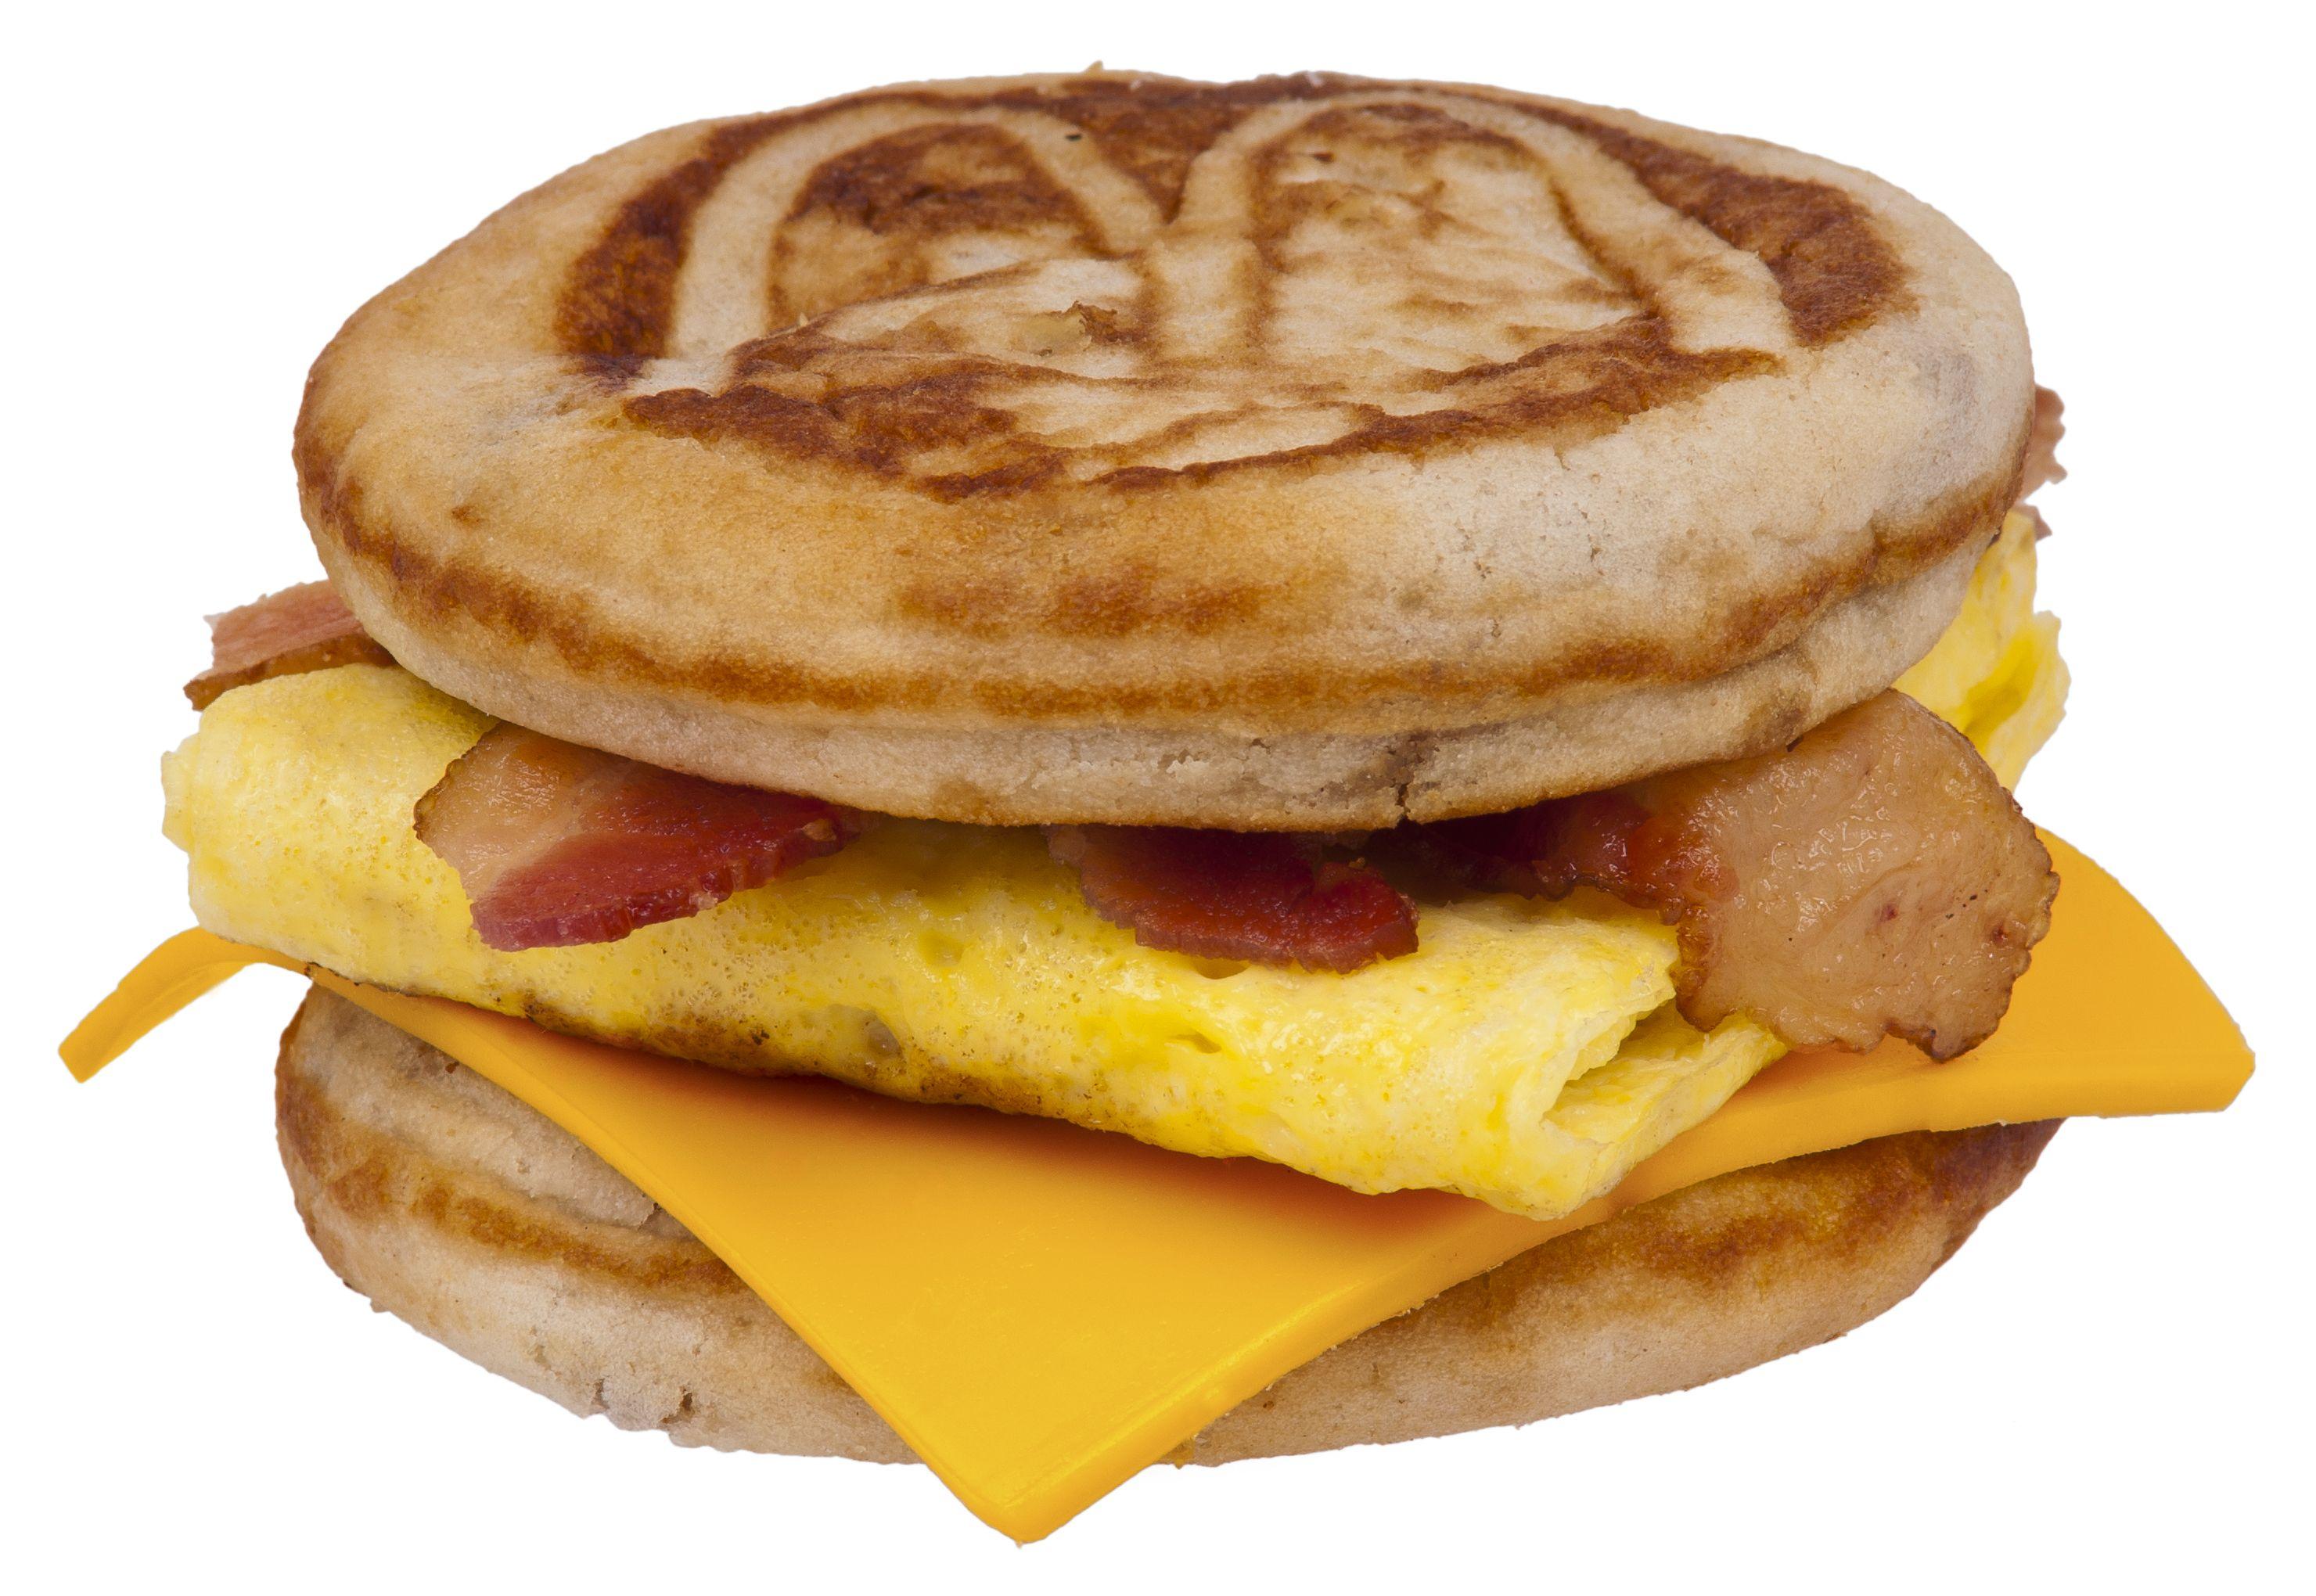 I thank god everyday for the Mcgriddle